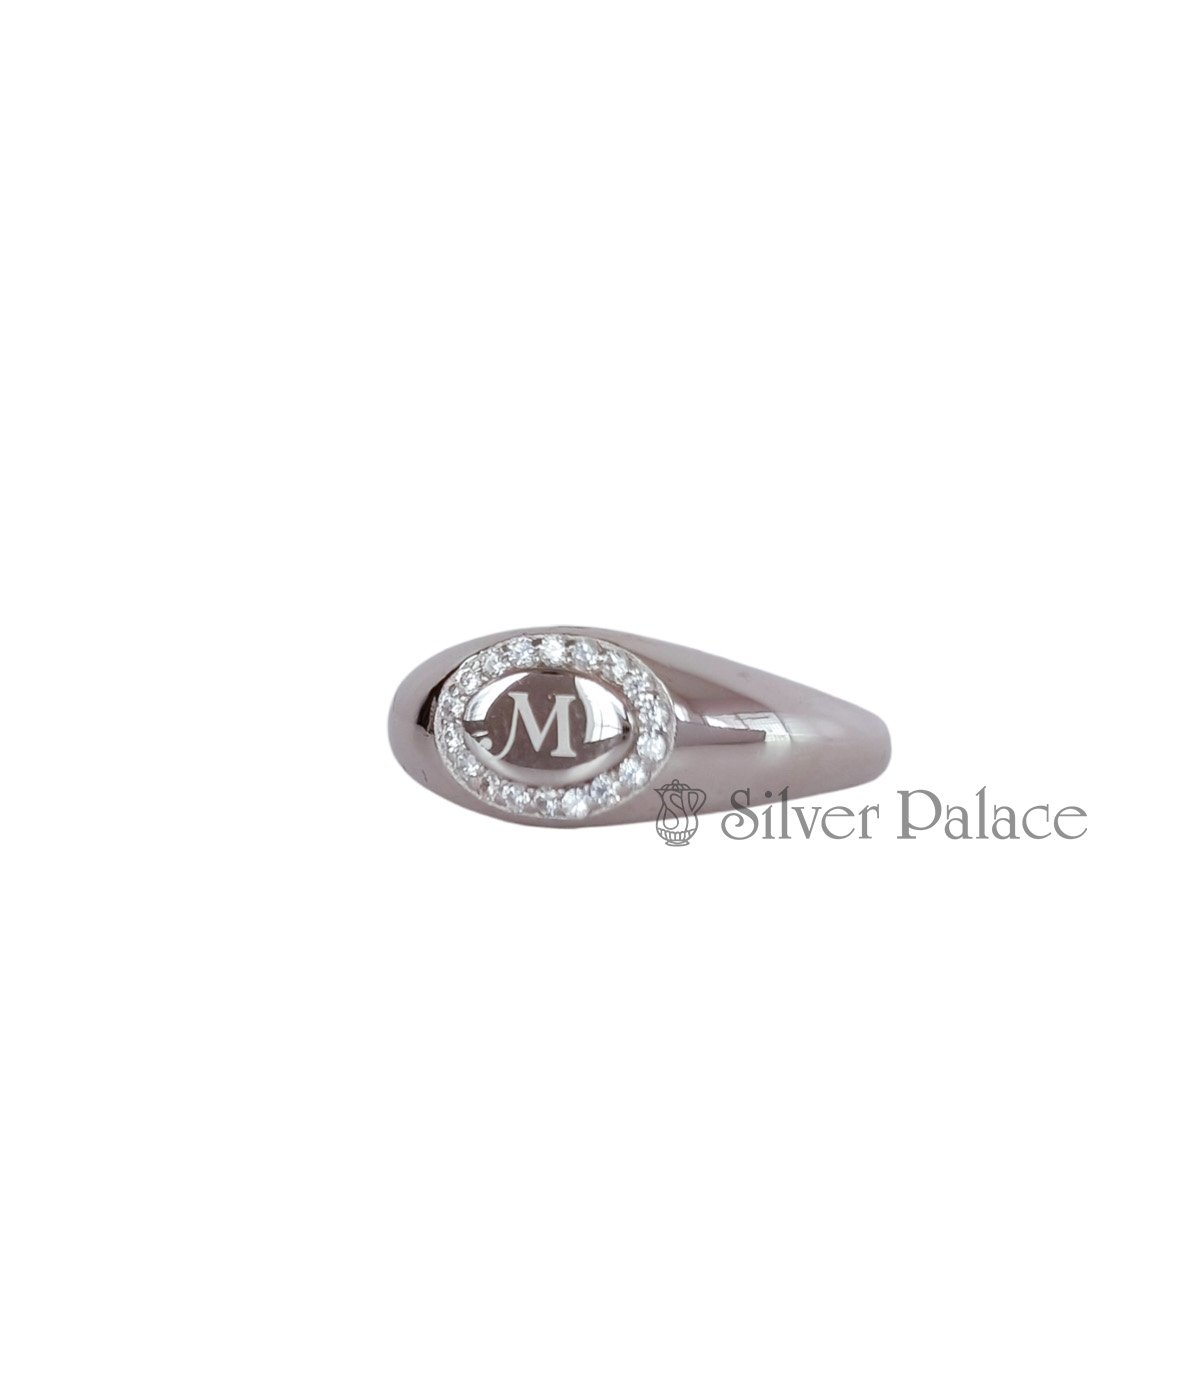 92.5 STERLING SILVER M LETTER STONE RING